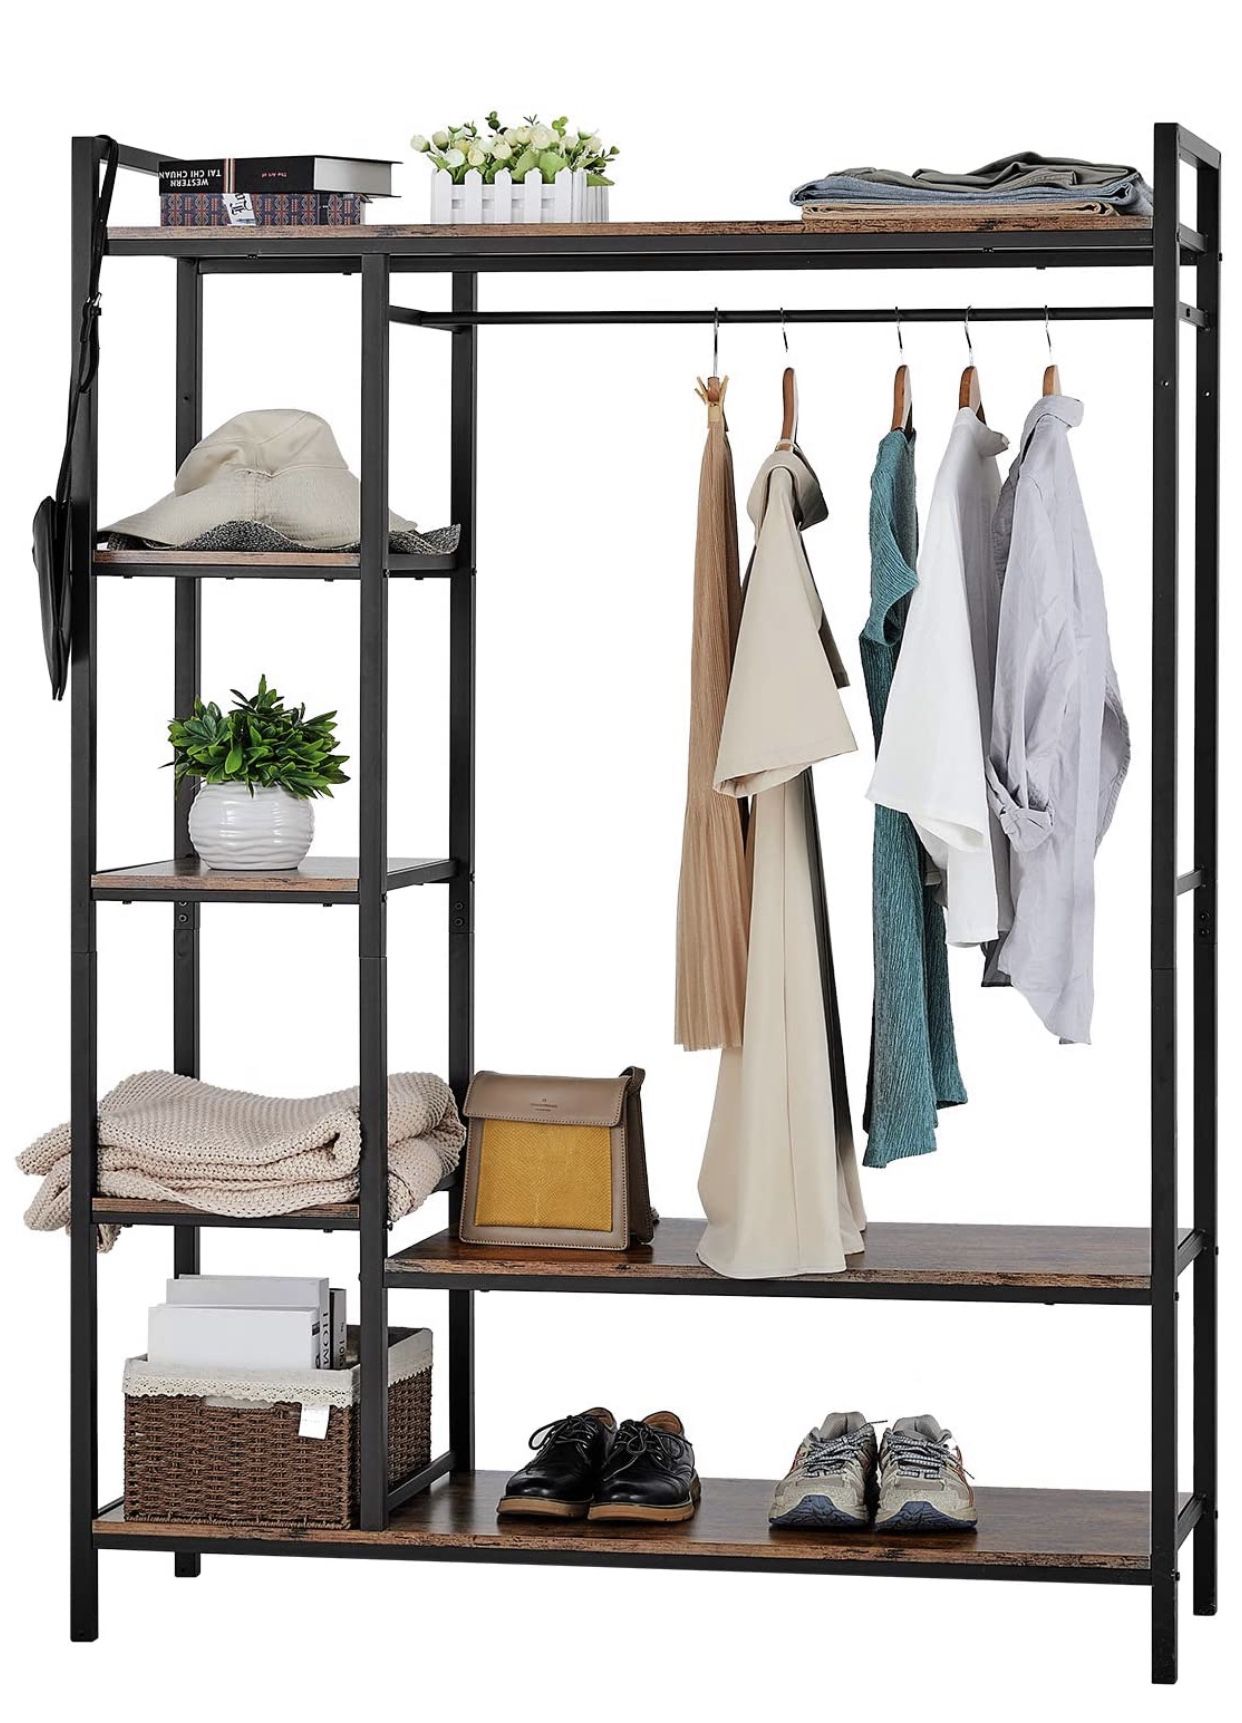 kealive Freestanding Closet Organizer Heavy Duty Clothing Rack with Shelves, Industrial Wood Wardrobe Garment Rack for Hanging Clothes and Storage (B